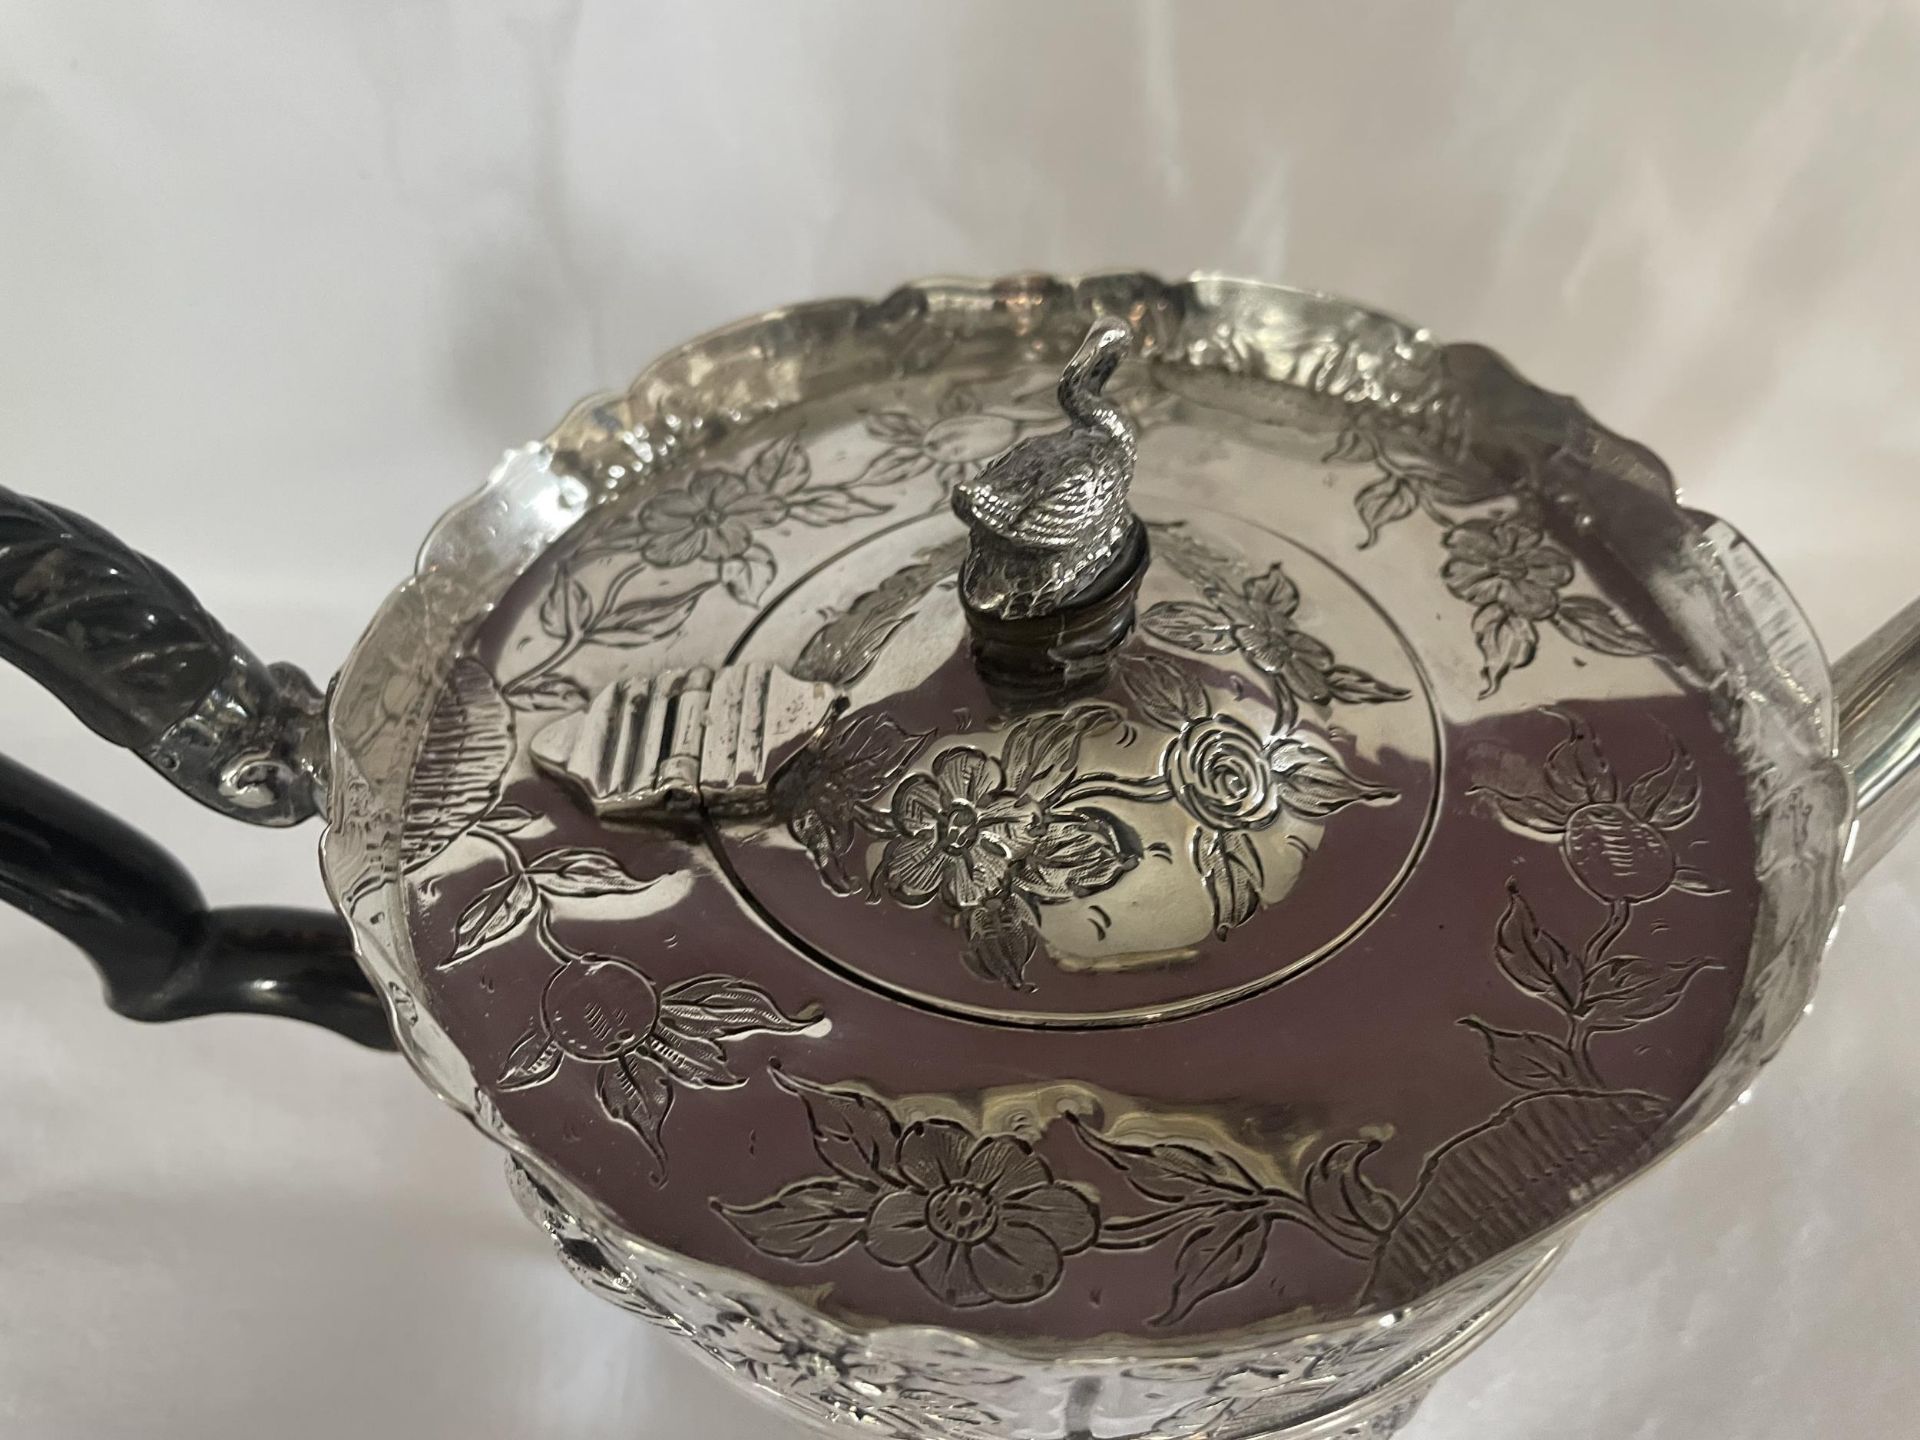 A HIGHLY DECORATIVE HALLMARKED 1892 LONDON SILVER TEAPOT, MAKER JAMES WAKELY AND FRANK CLARKE - Image 2 of 9